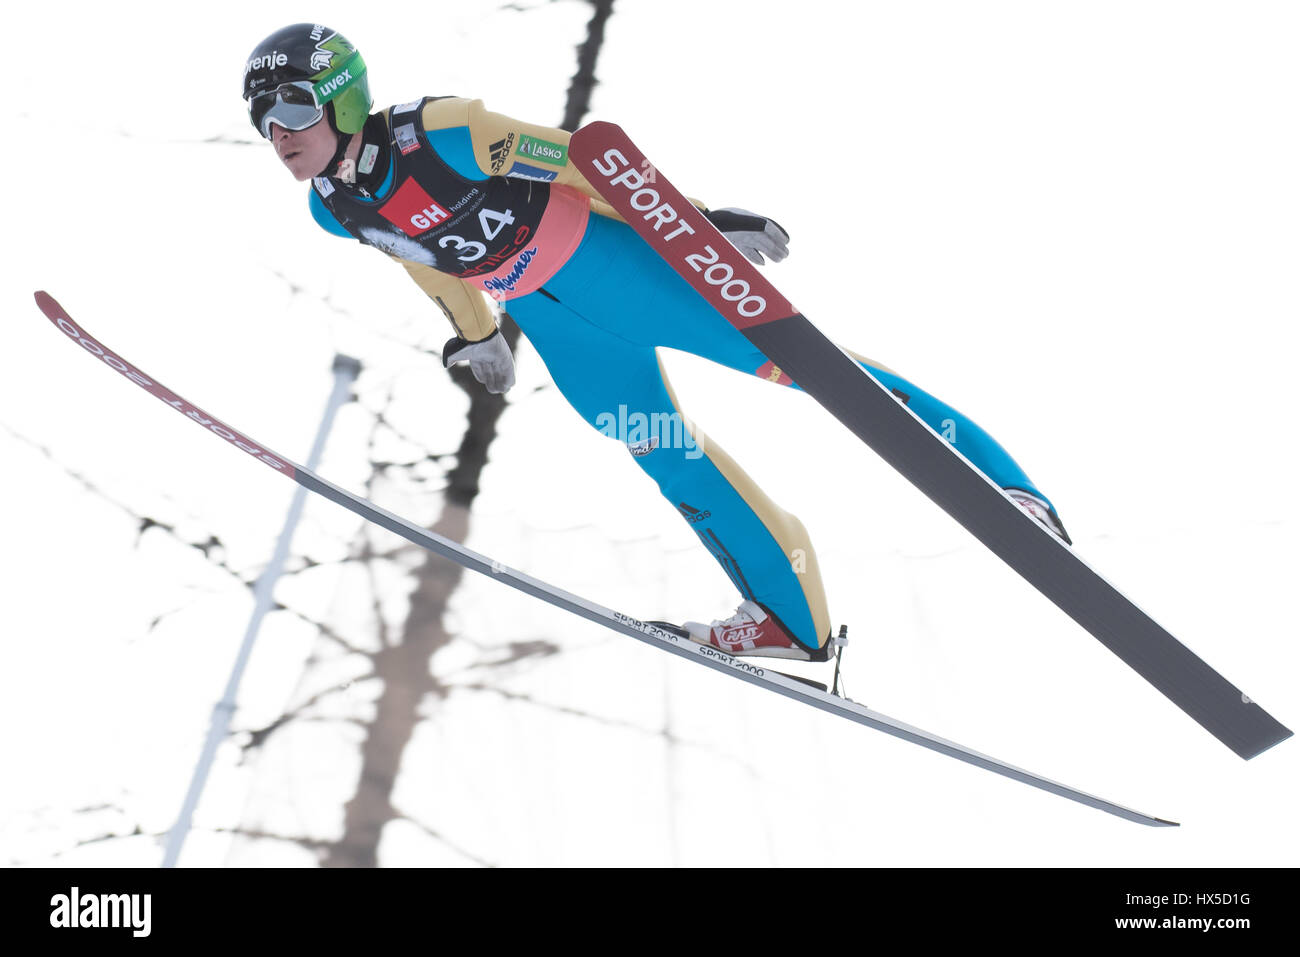 Planica, Slovenia. 24th Mar, 2017. Tepes Jurij of Slovenia competes during Planica FIS Ski Jumping World Cup finals on March 24, 2017 in Planica, Slovenia Credit: Rok Rakun/Pacific Press/Alamy Live News Stock Photo